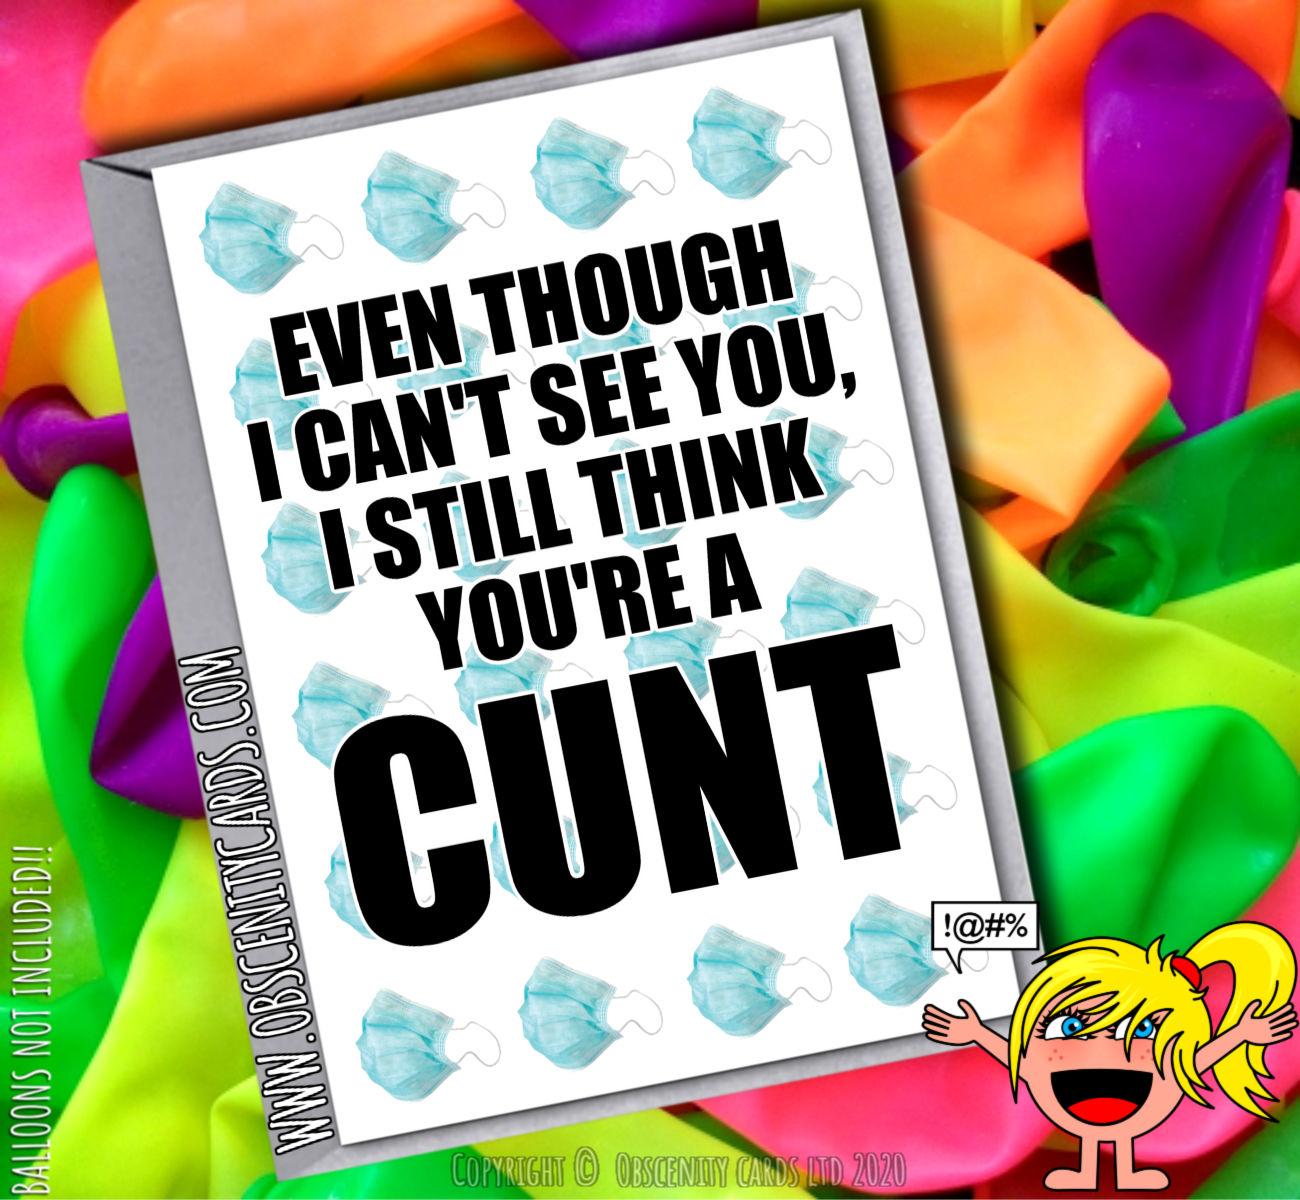 EVEN THOUGH I CAN'T SEE YOU, I STILL THINK YOU'RE A CUNT SELF ISOLATION CARD